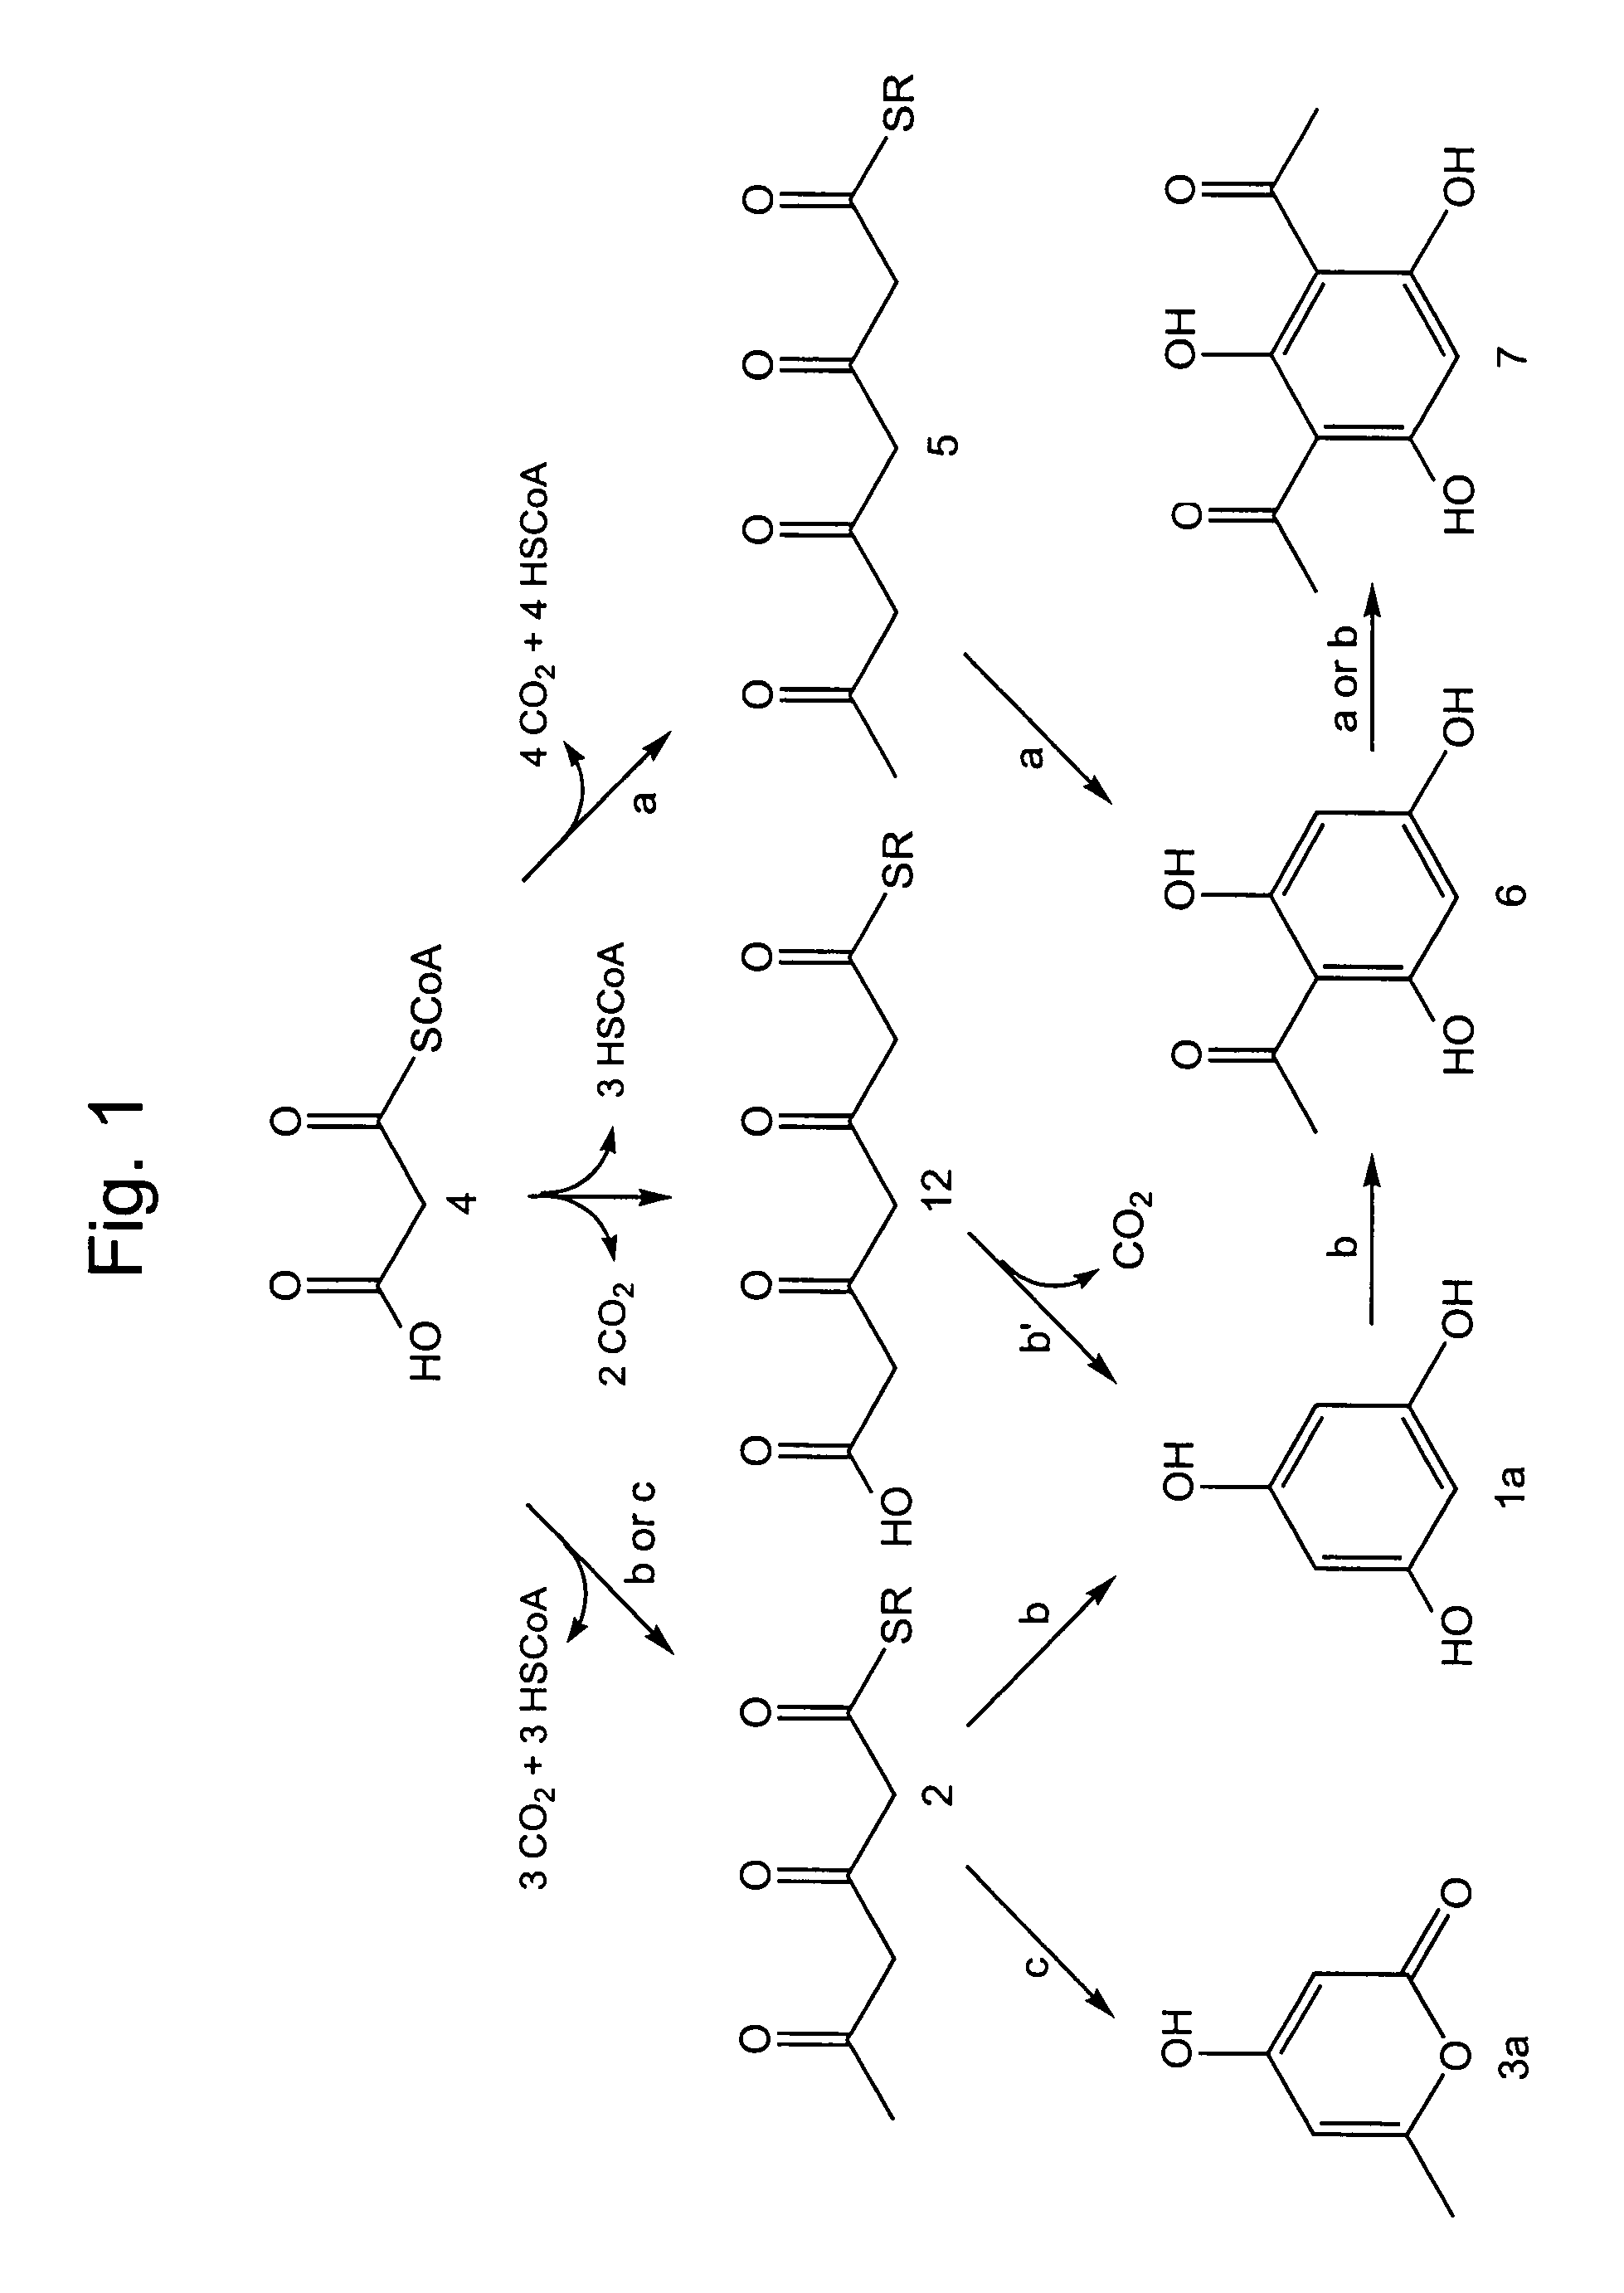 Biosynthesis of phloroglucinol and preparation of 1,3-dihydroxybenzene therefrom